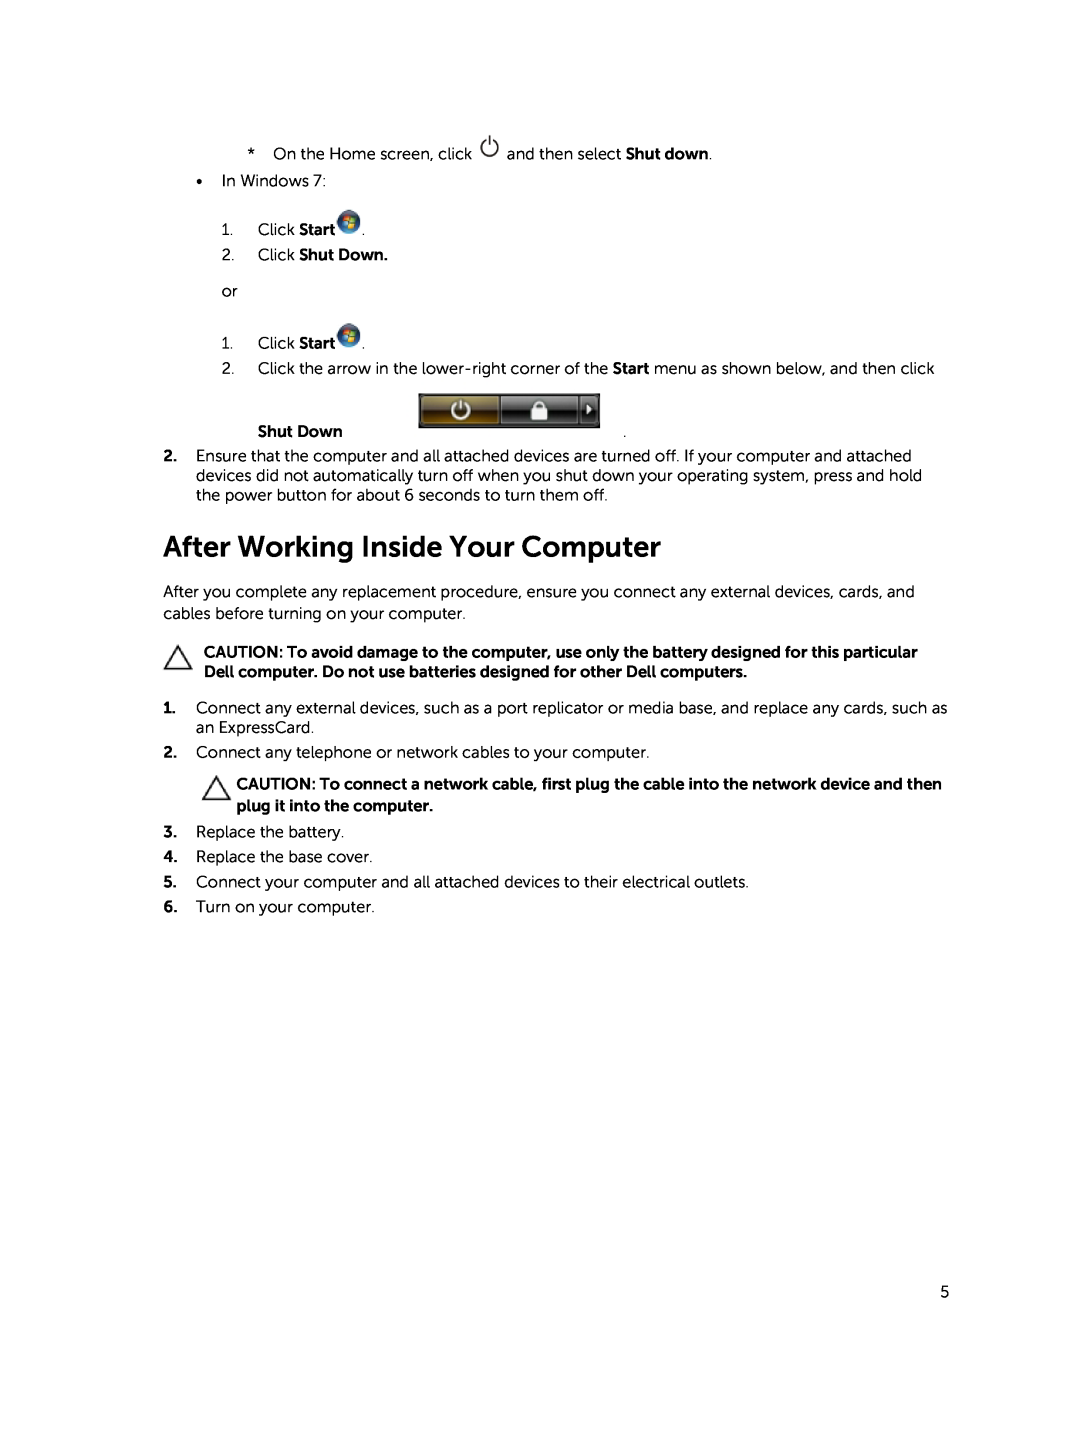 Dell E5450 owner manual After Working Inside Your Computer 